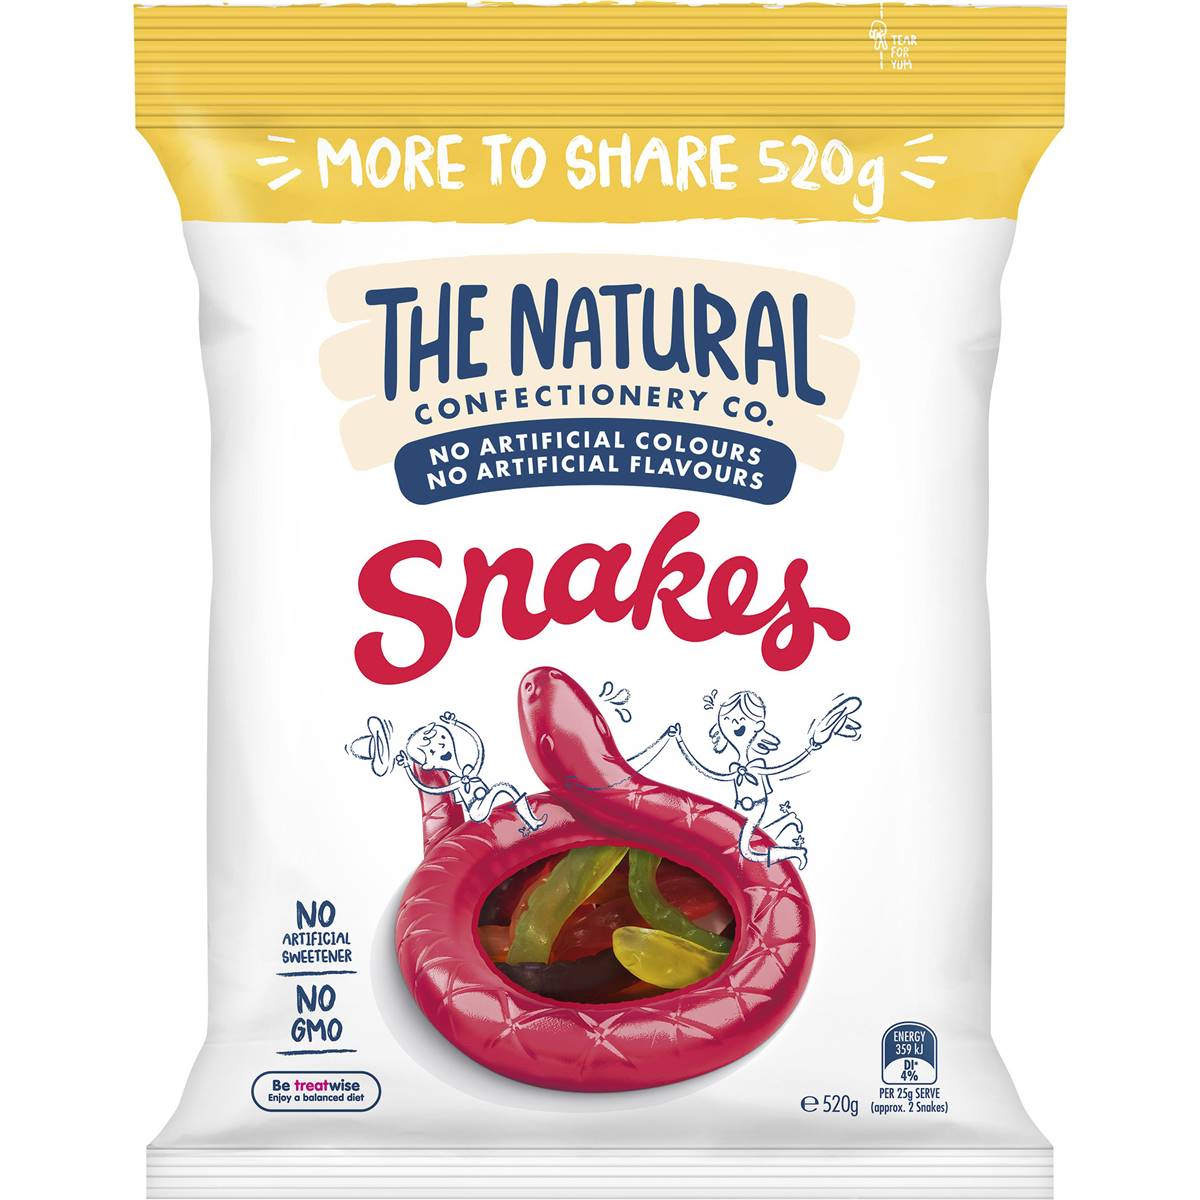 Calories in The Natural Confectionery Co. Snakes Lollies